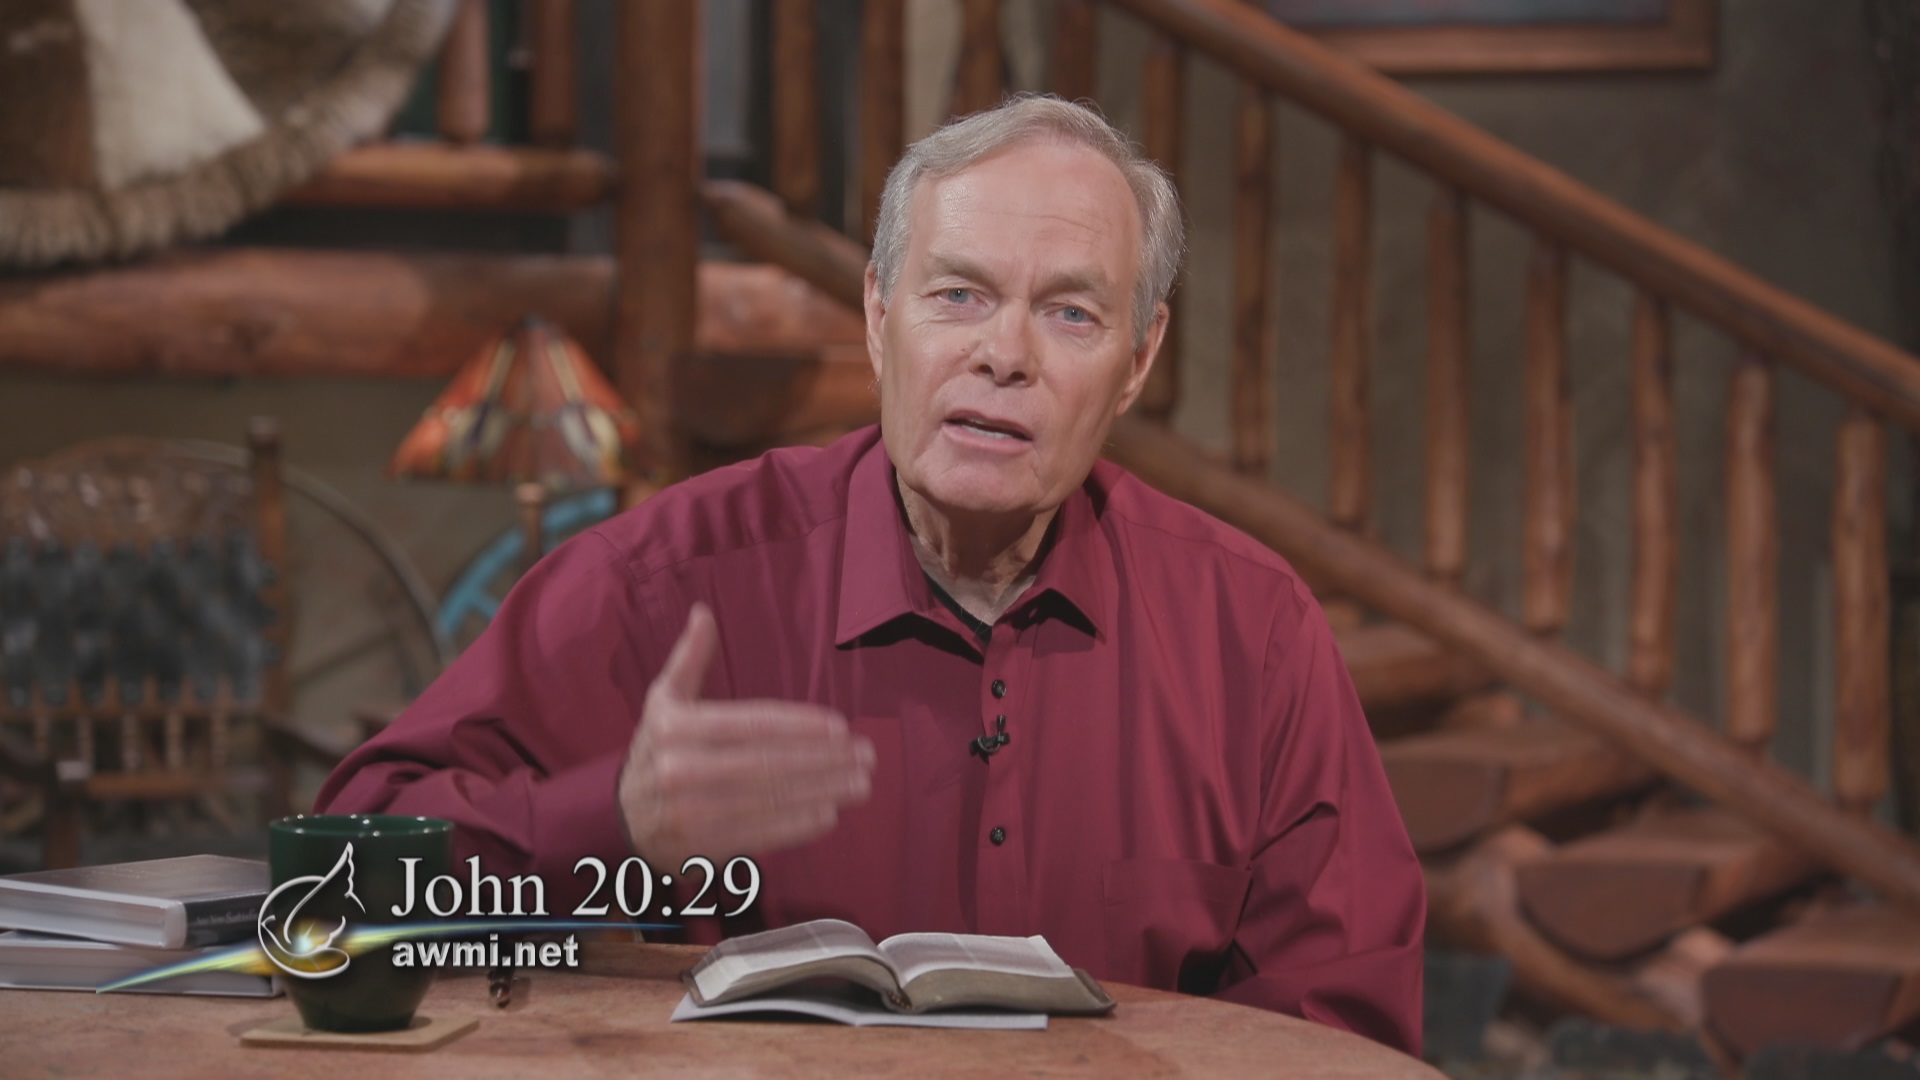 Are You Satisfied With Jesus - January 13, 2022